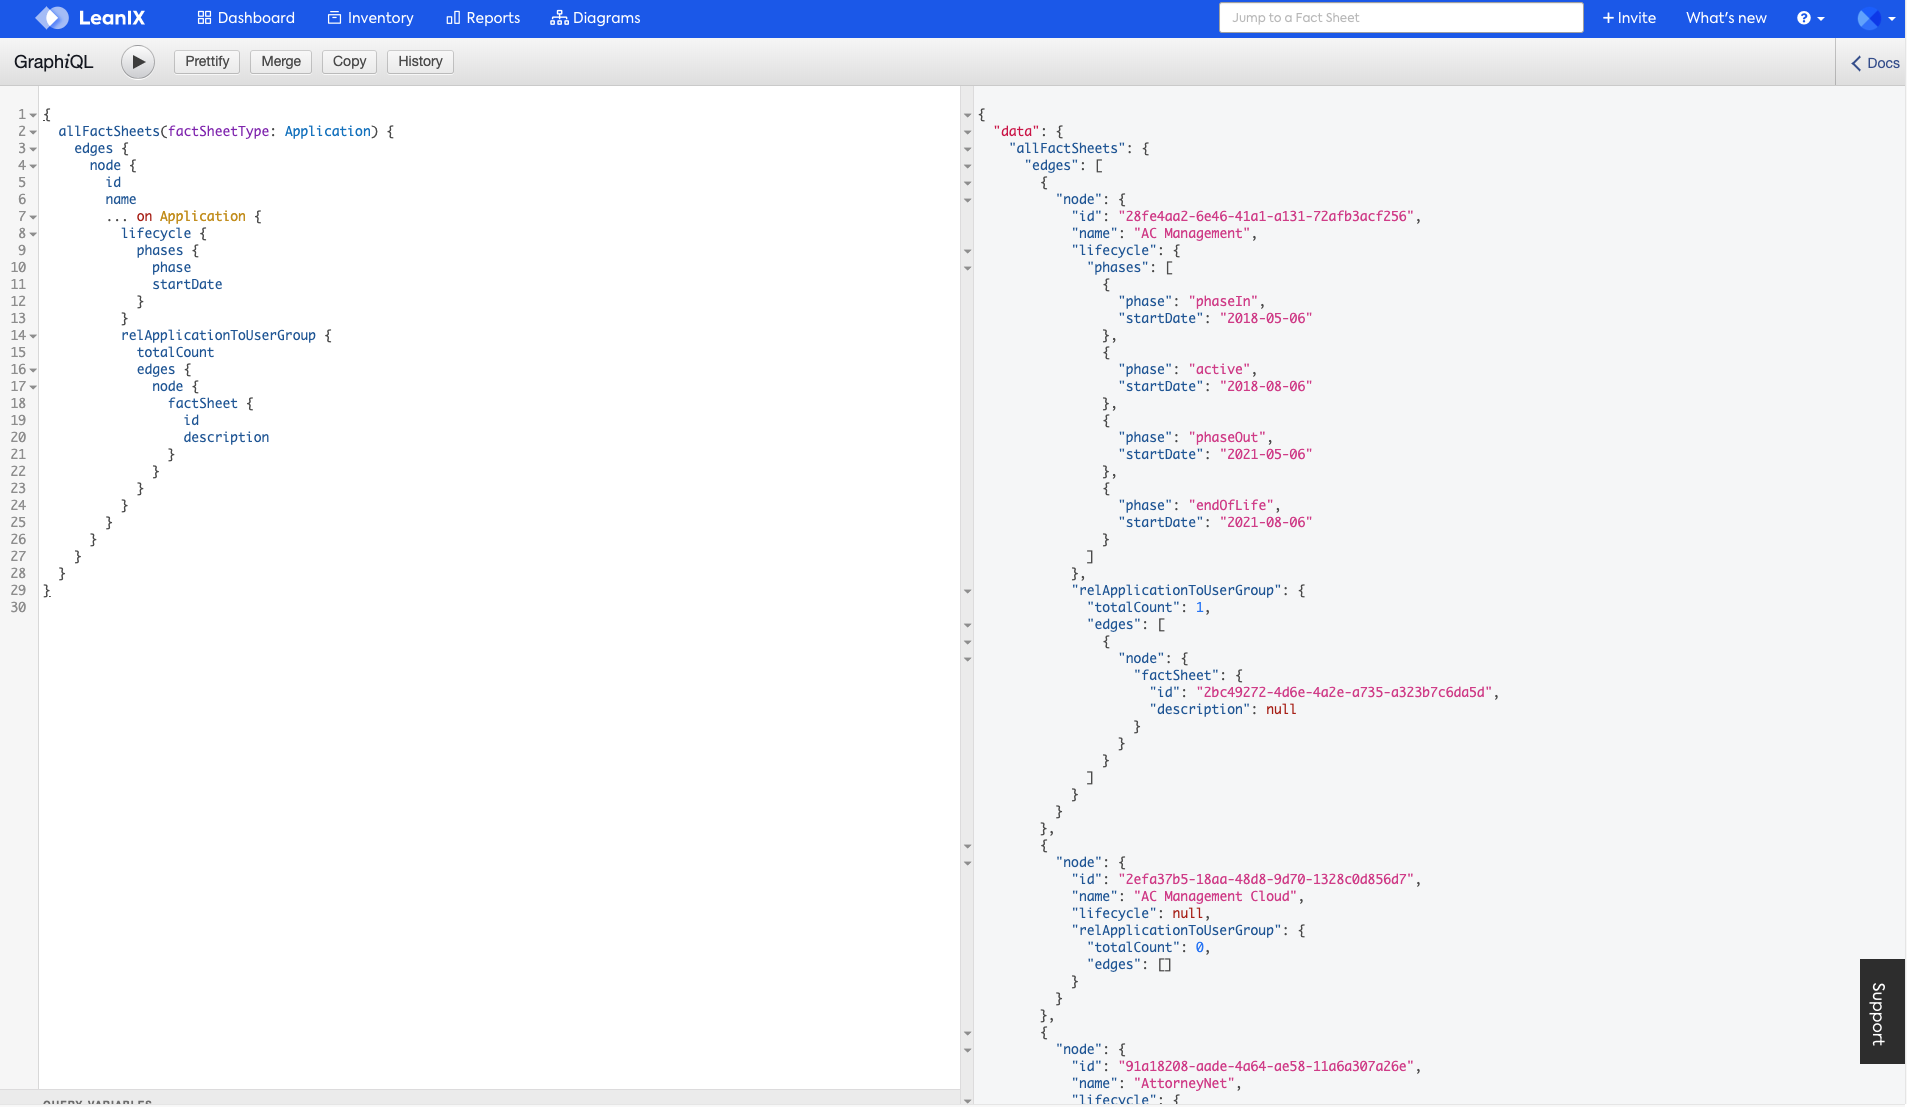 Example of a GraphQL query utilizing the built-in editor.